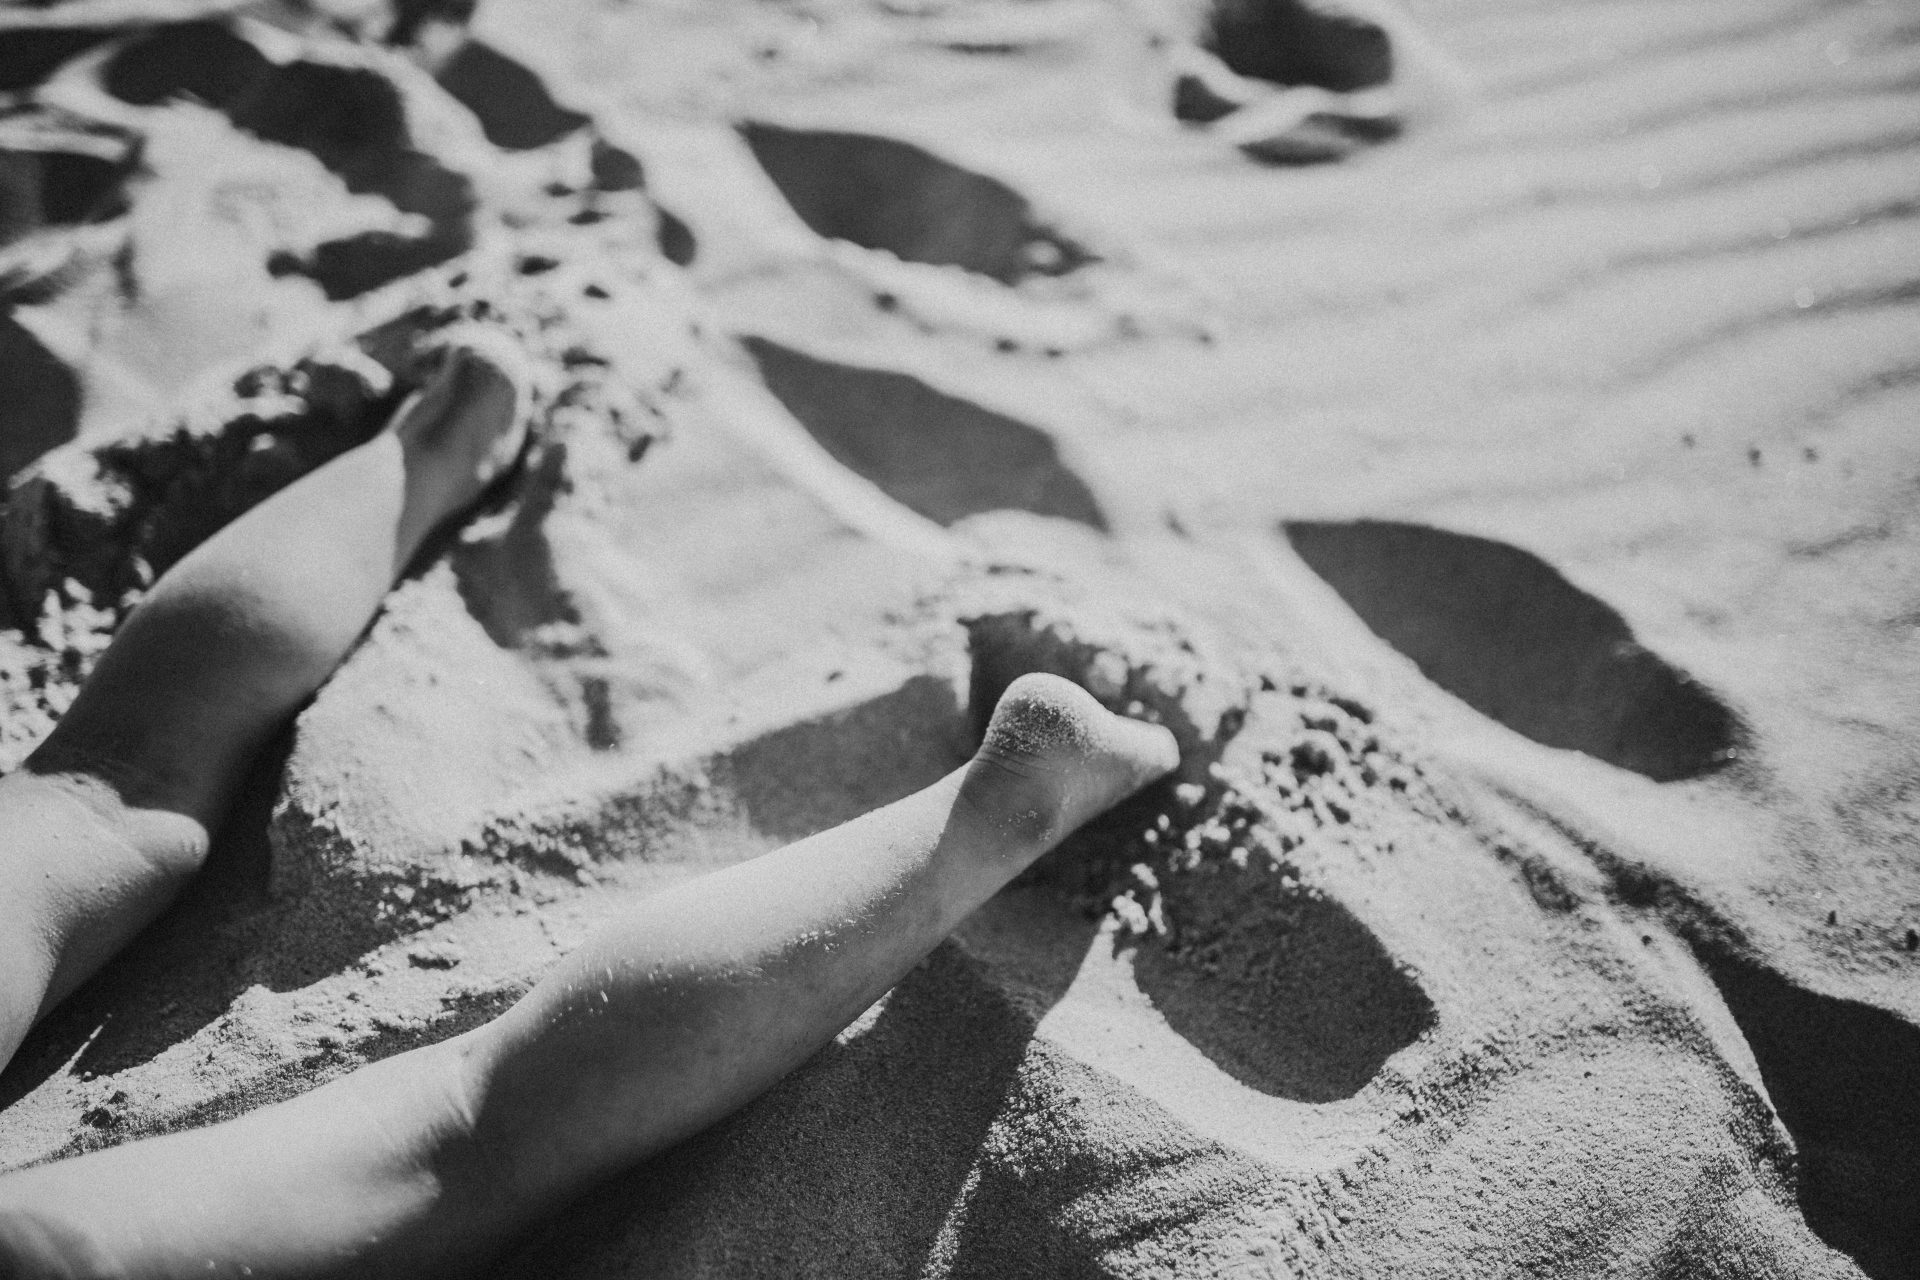 Detail shot of young girl's feet laying in the sand at the beach